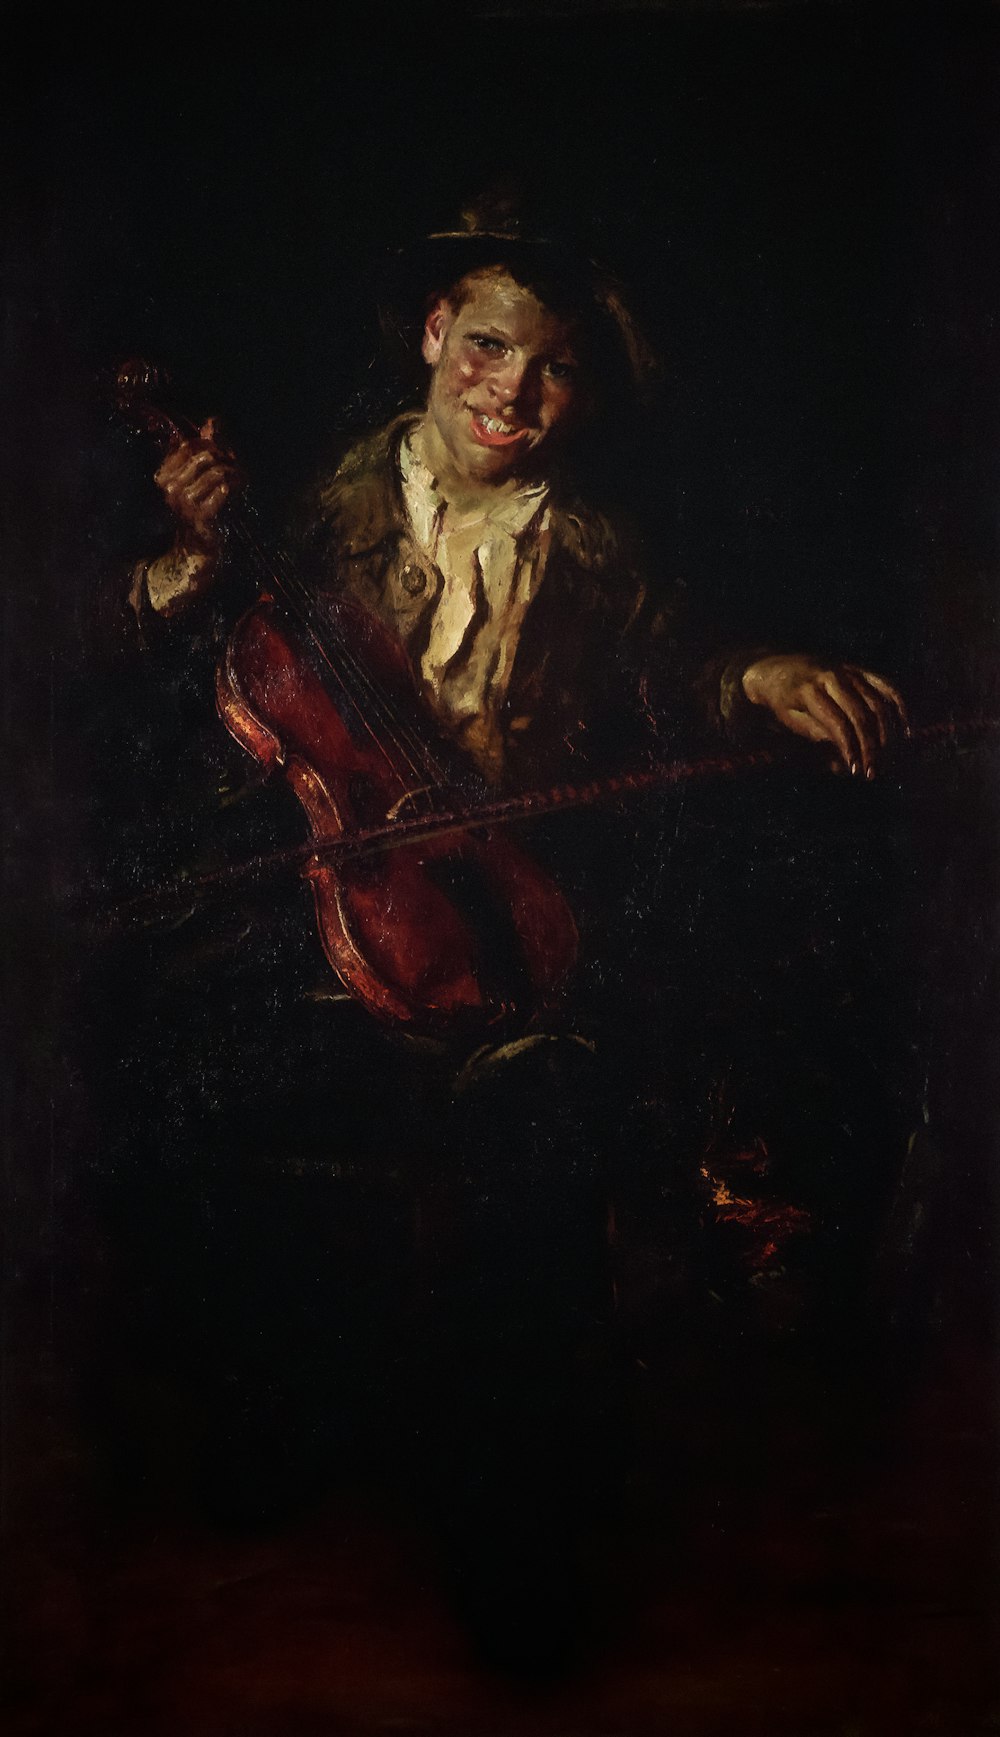 a painting of a man holding a violin